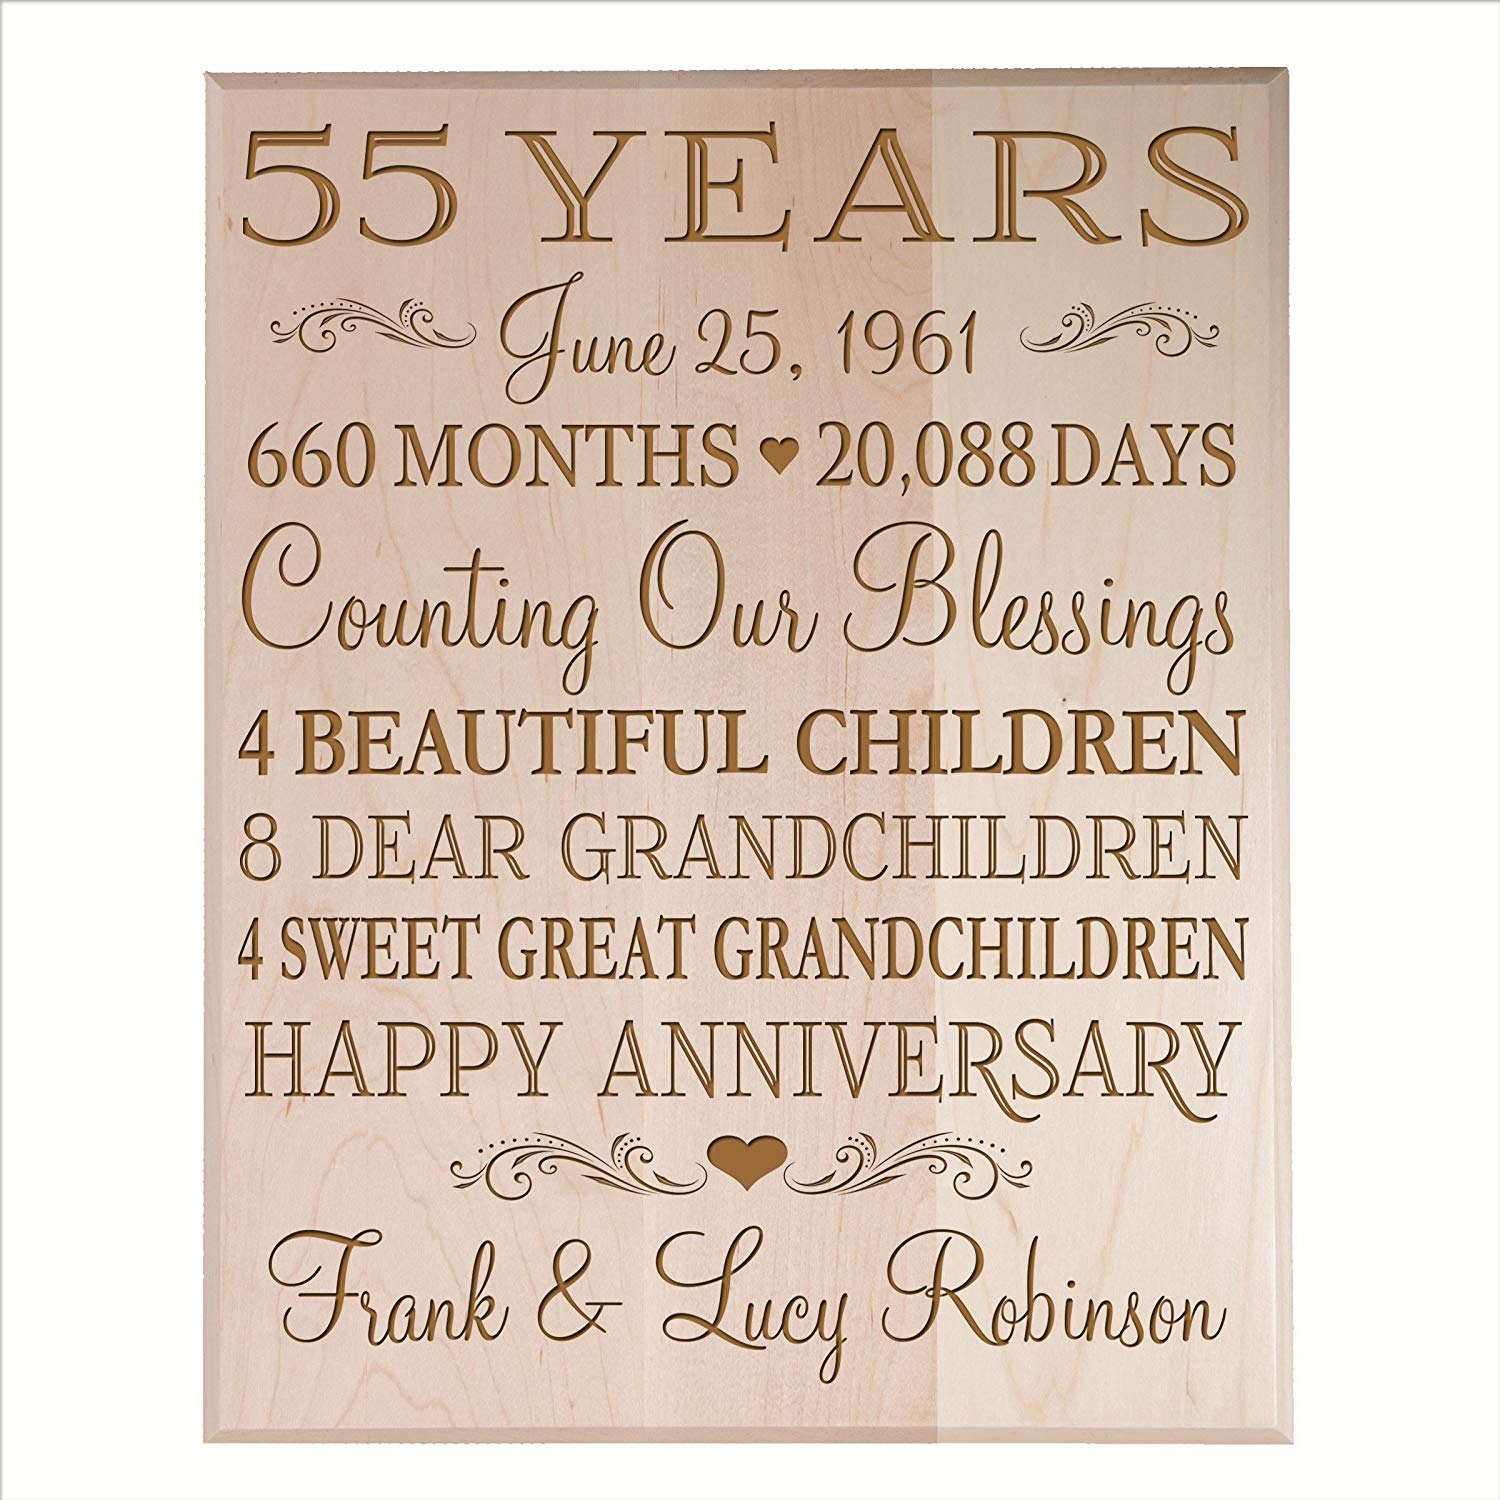 Personalized 55th Anniversary Wall Plaque - Counting Our Blessings - LifeSong Milestones